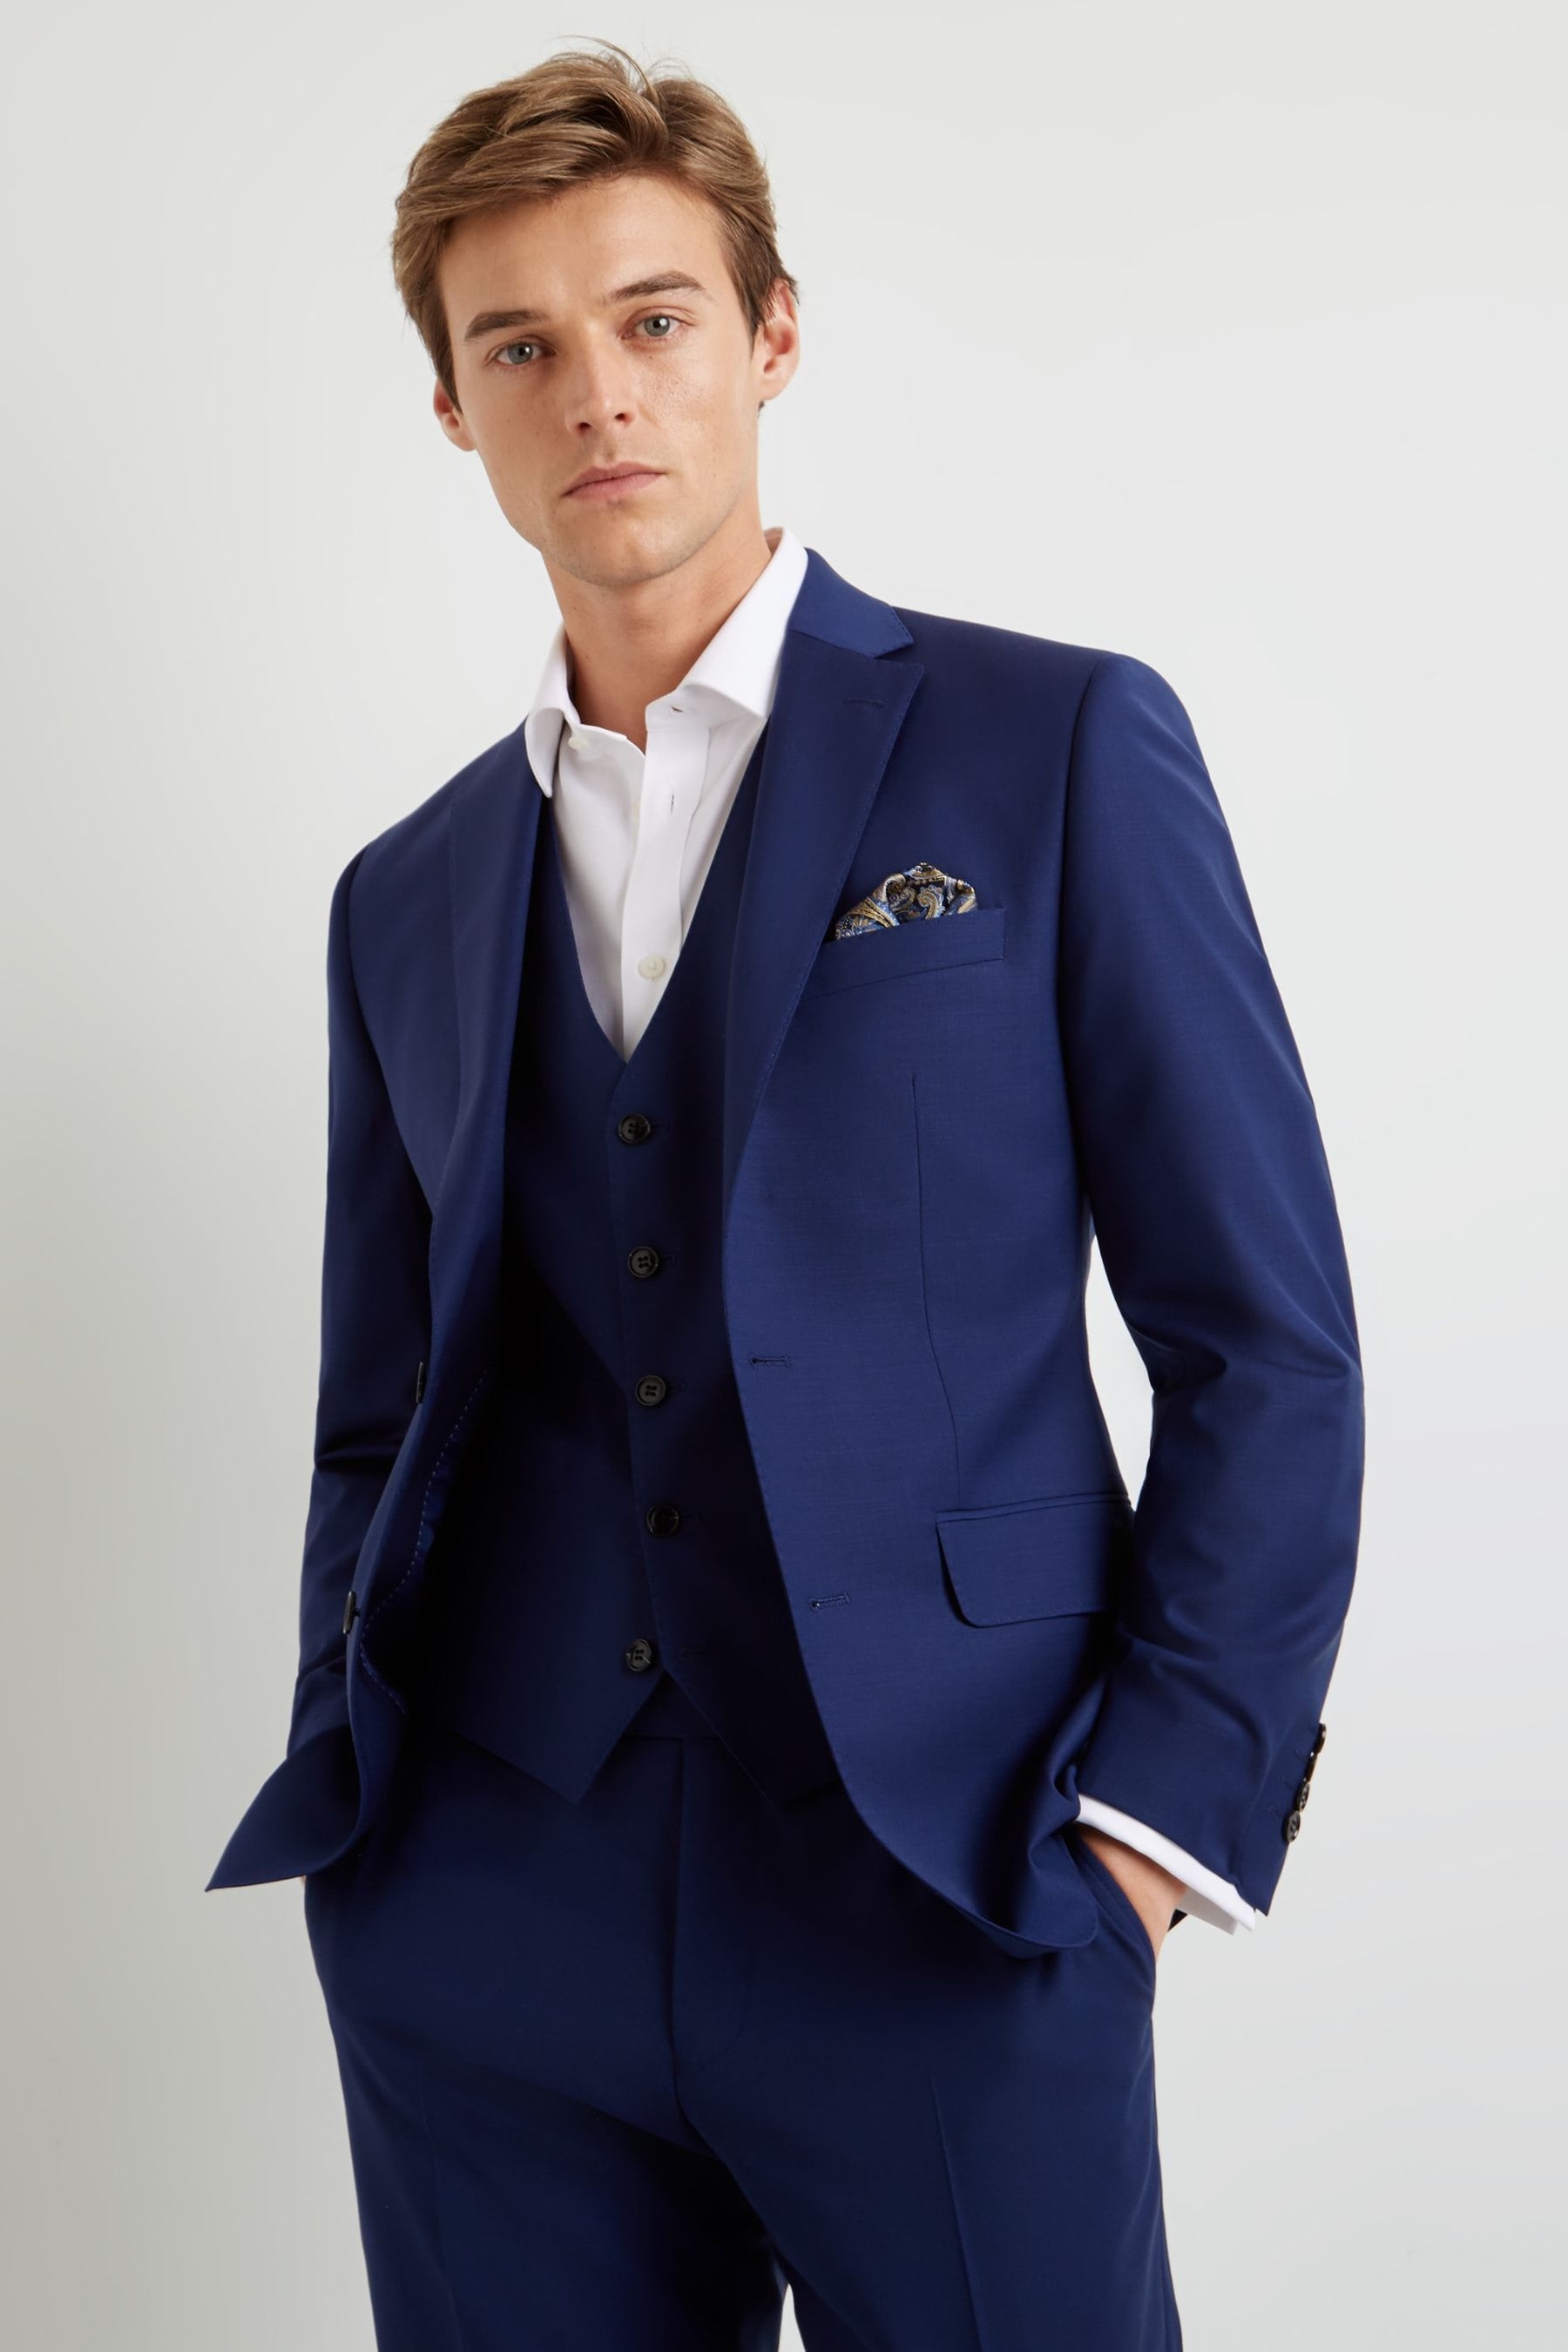 Buy Moss 1851 Performance Tailored Fit Royal Blue Jacket from the Next